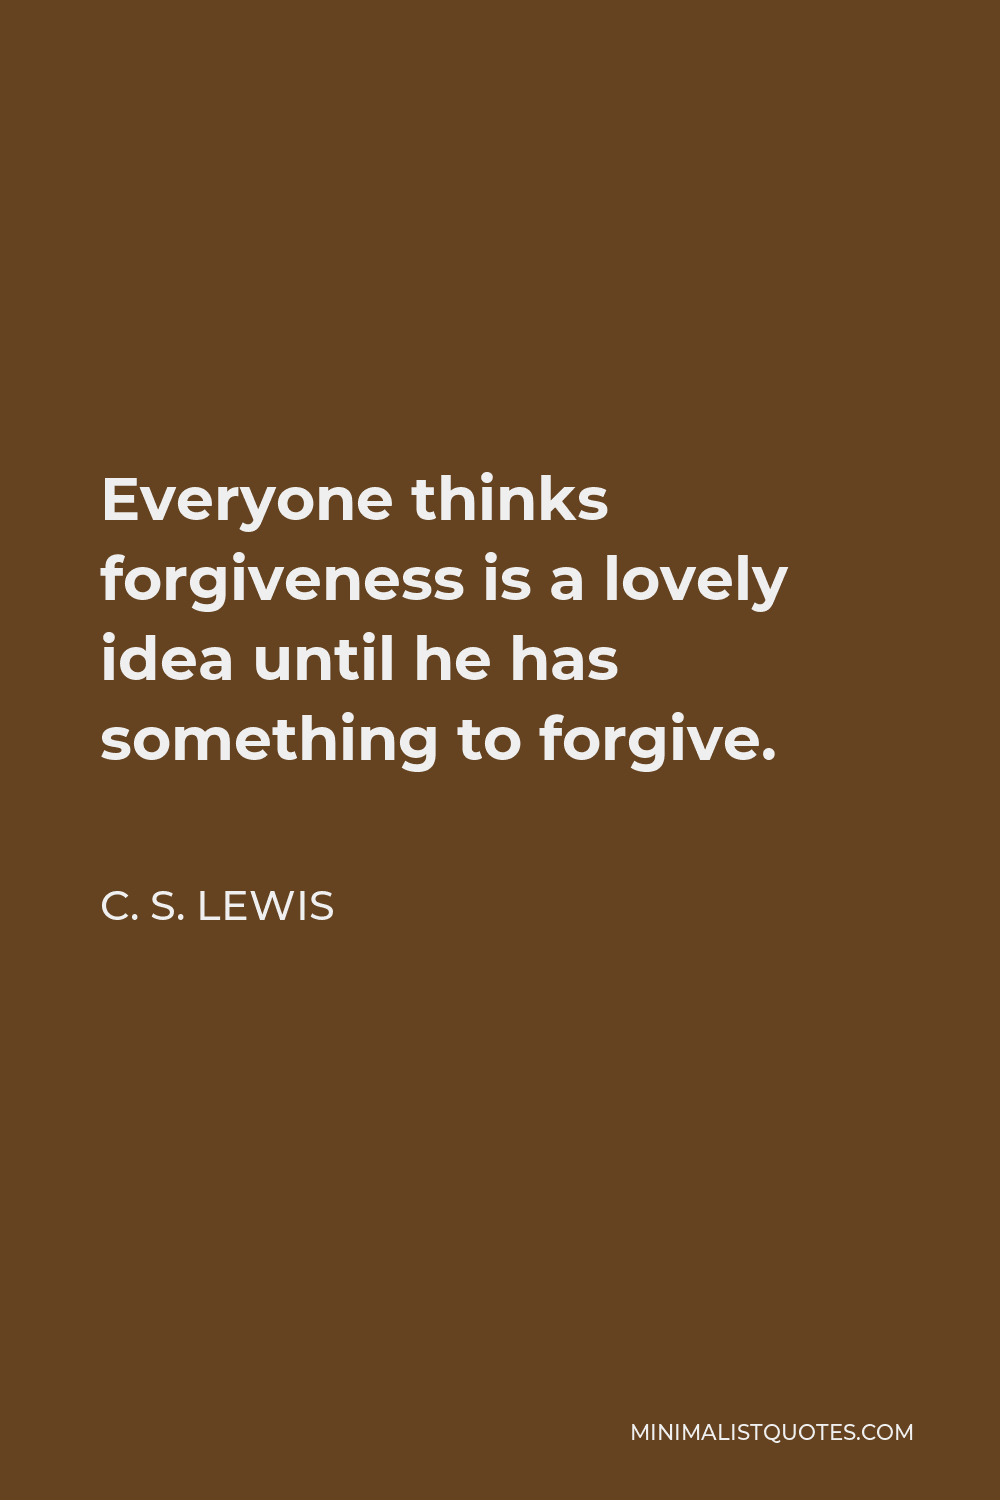 C. S. Lewis Quote - Everyone thinks forgiveness is a lovely idea until he has something to forgive.